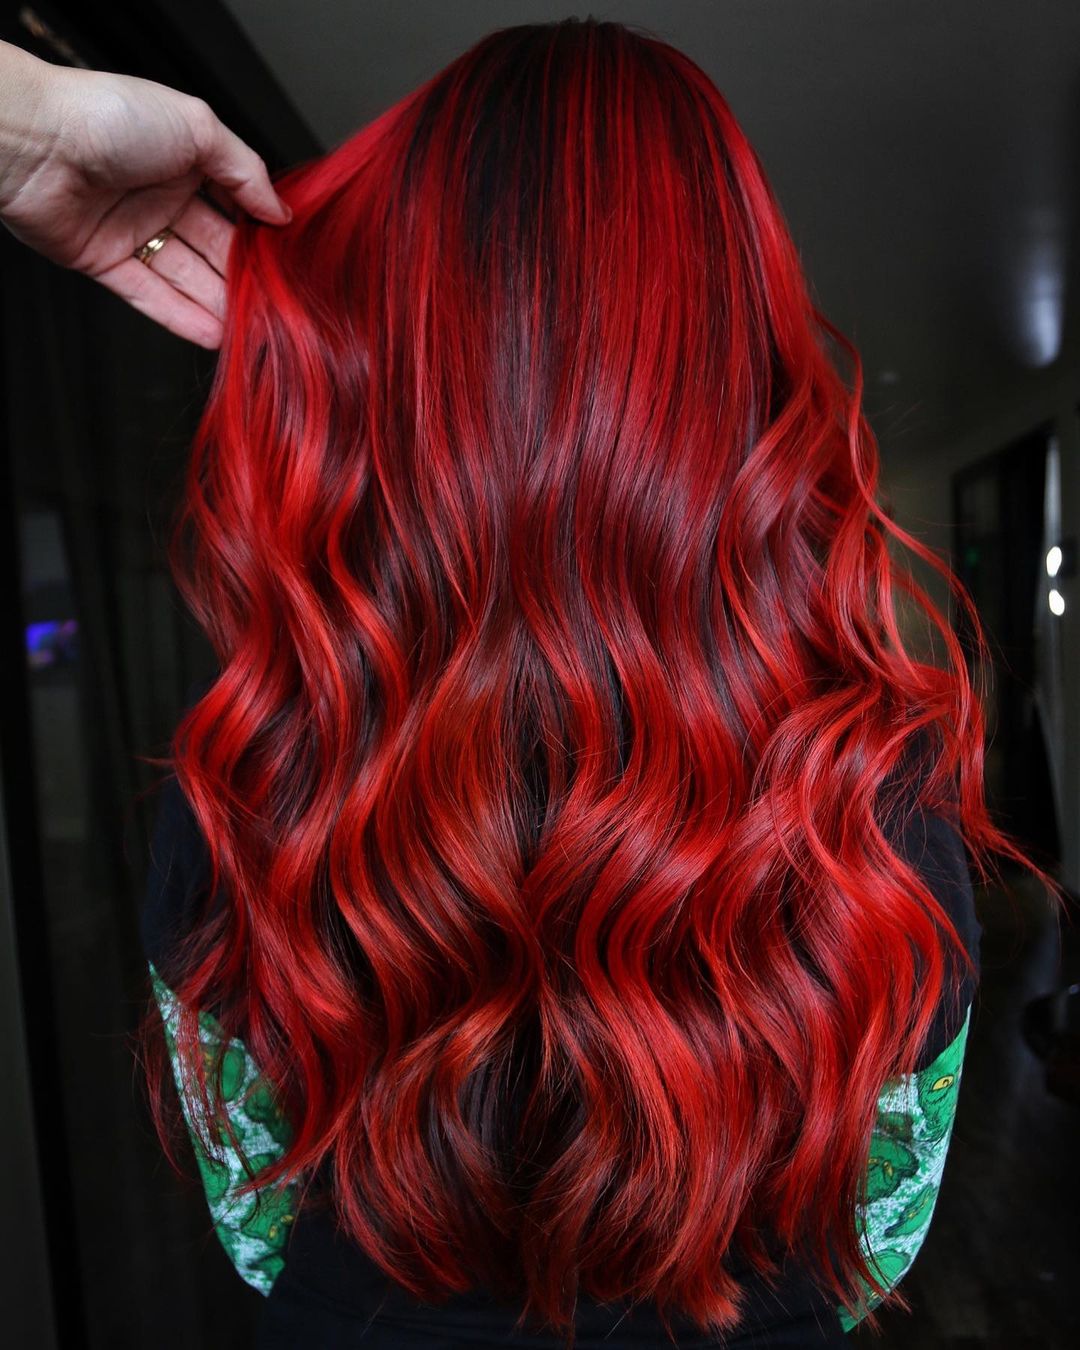 Bright Red Color on Long Wavy Hair